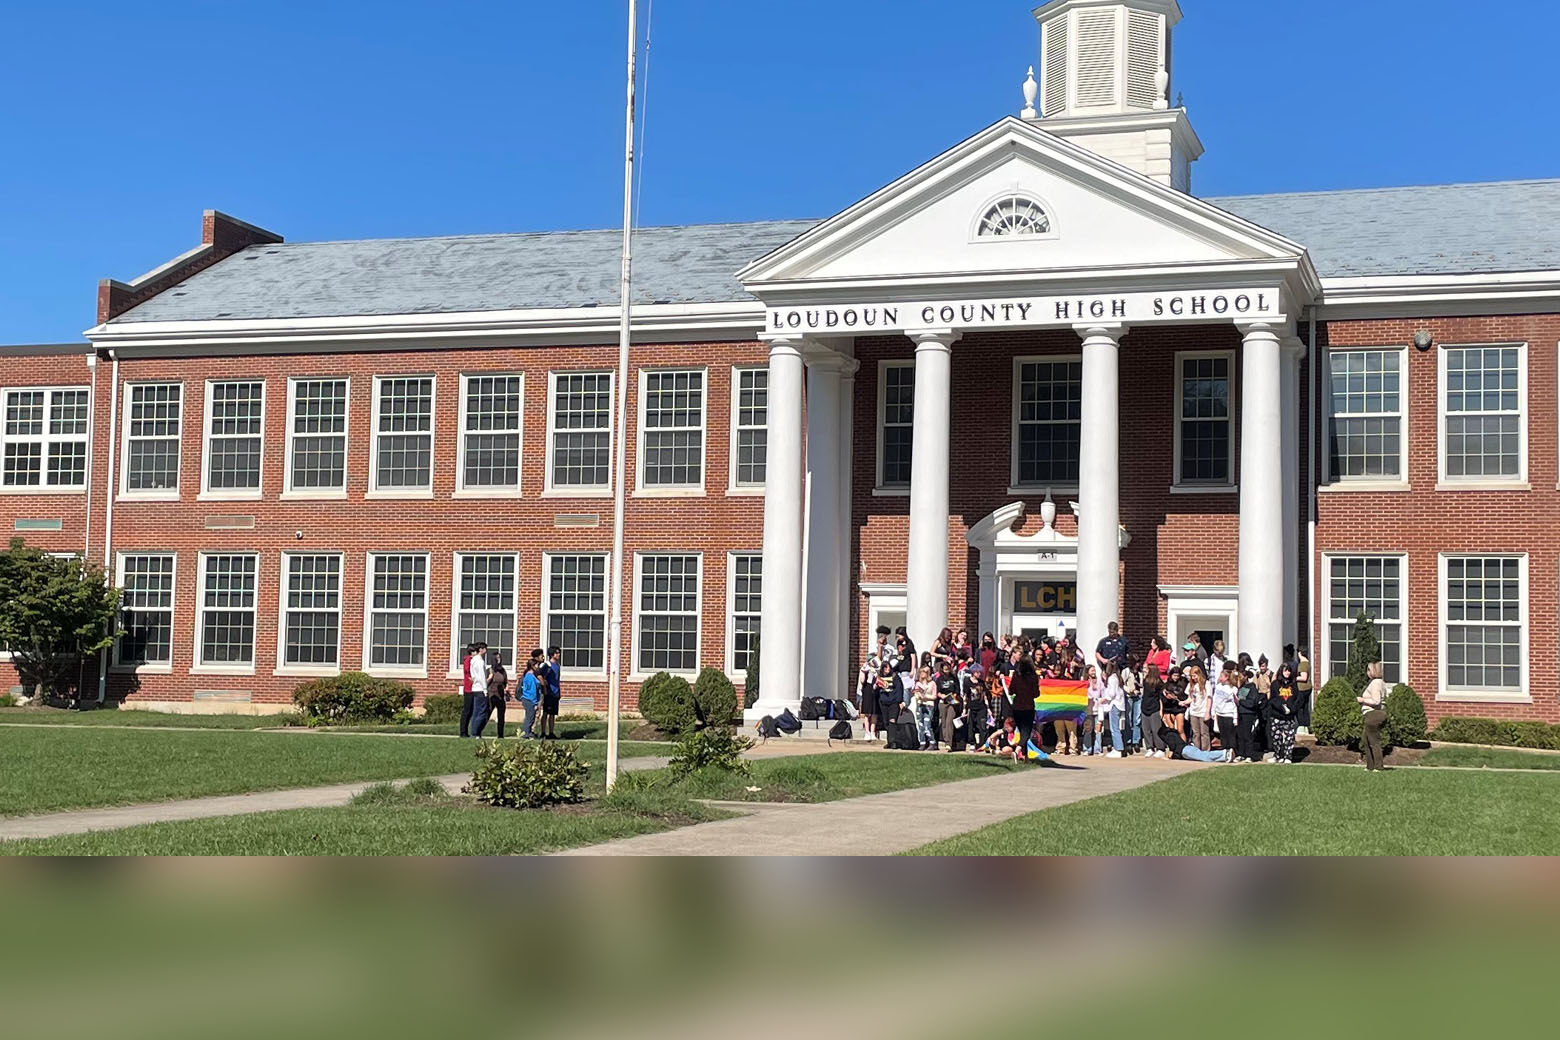 Students in Loudoun County, Virginia, walk out in protest of new transgender student policies announced by Gov. Glenn Youngkin. (WTOP/Neal Augenstein)